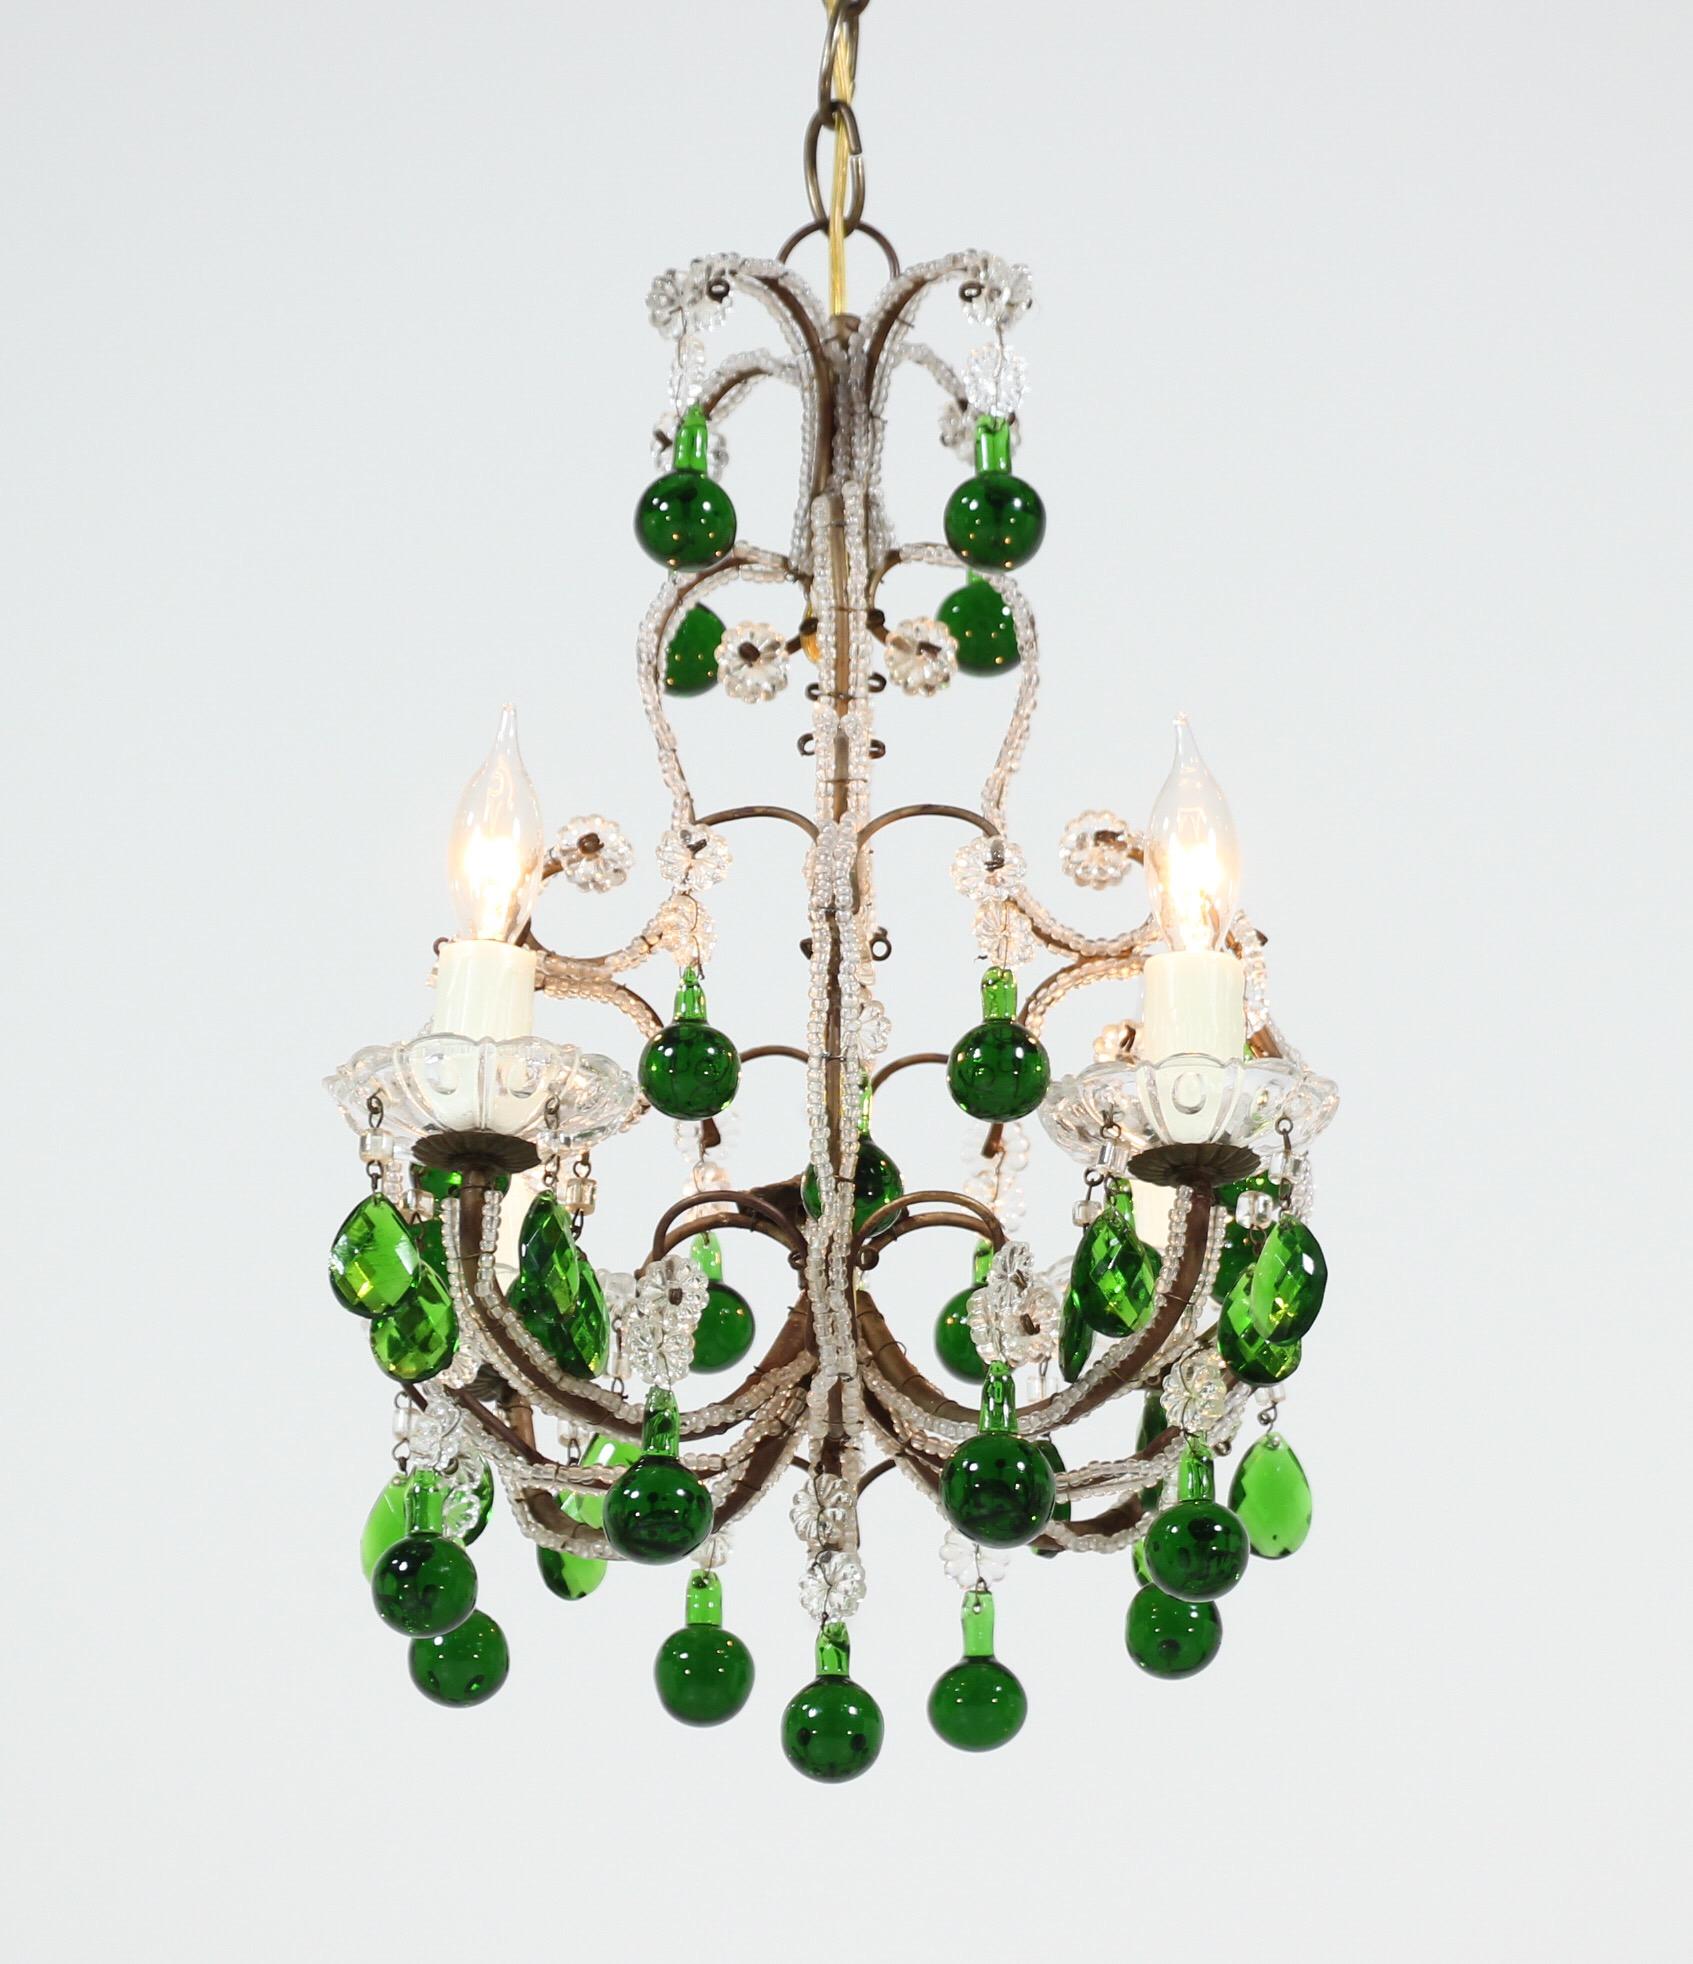 Very pretty, 1950s Italian crystal beaded chandelier with green Murano drops.

This petite-scale chandelier features a crystal beaded gilt-iron frame which has been decorated with emerald green Murano glass drops and prisms. New bee wax candle